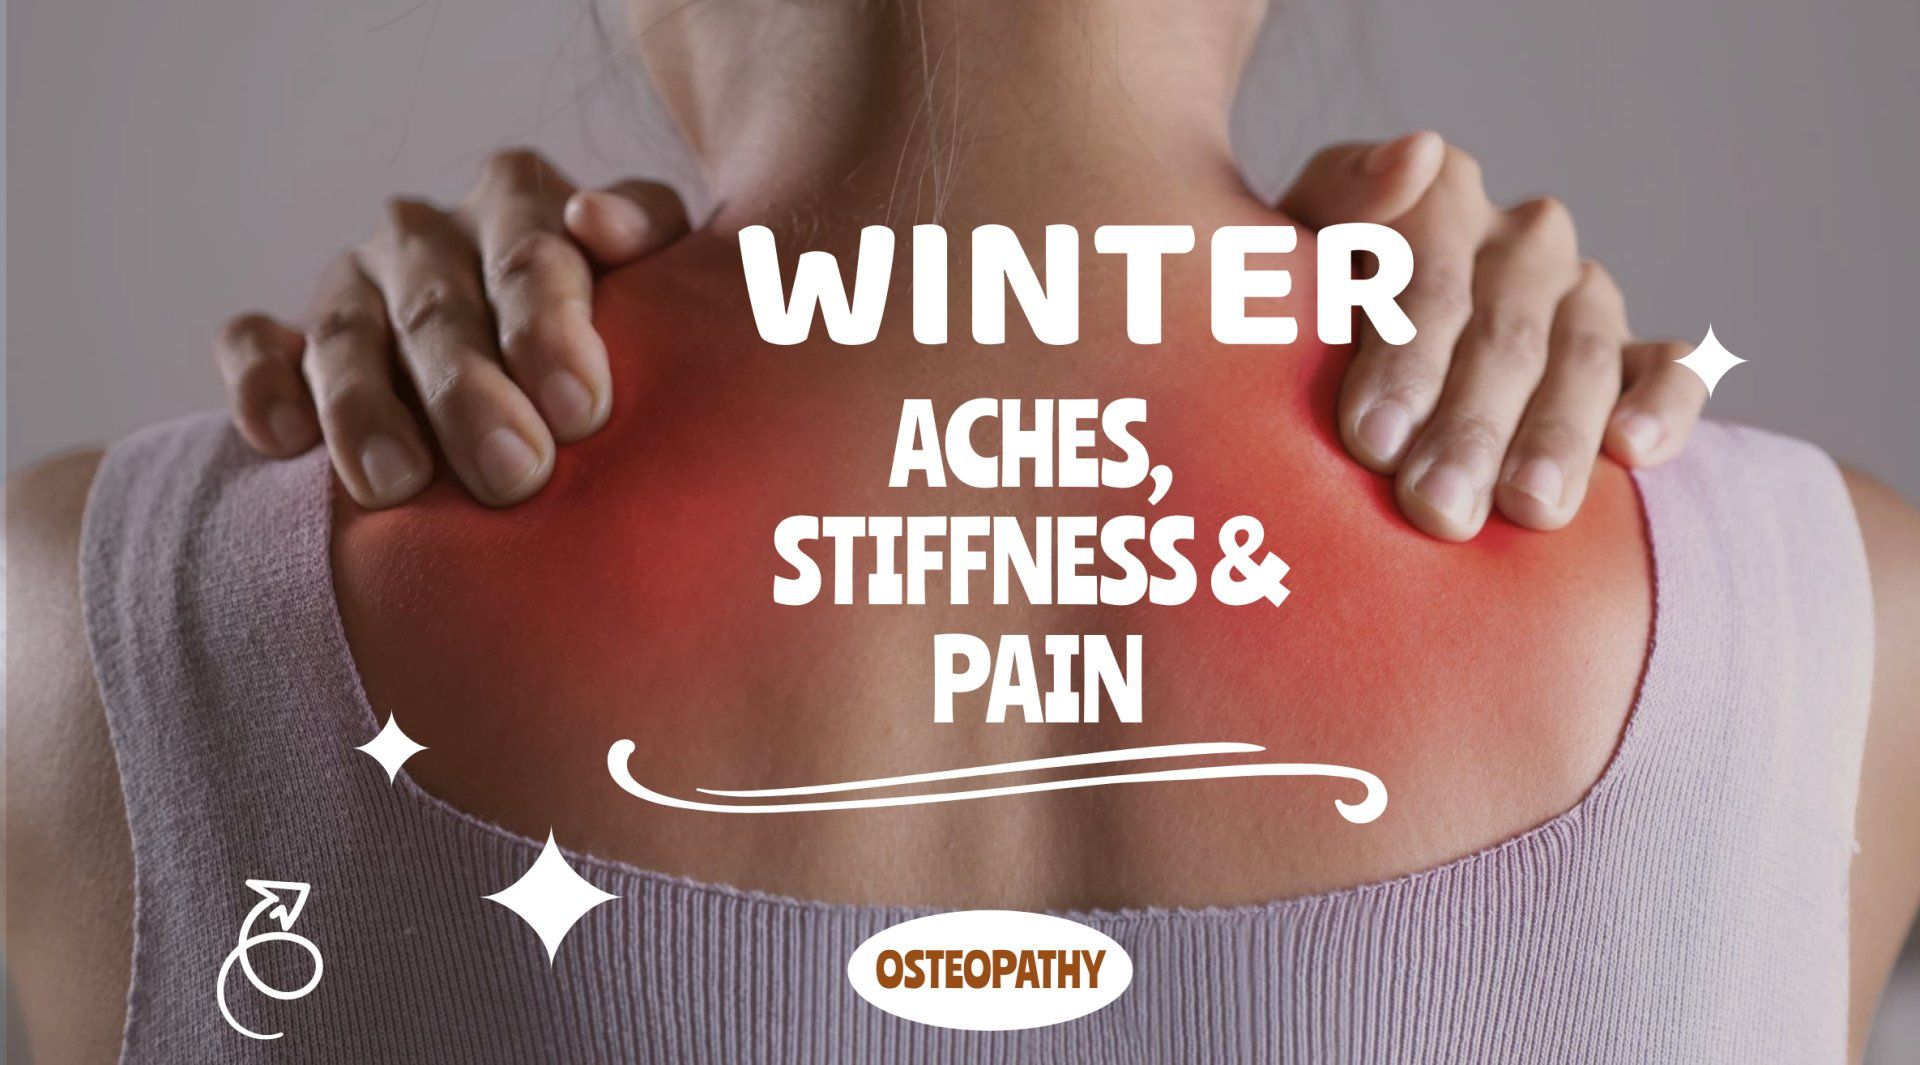 Some people’s bodies react badly to falling temperatures. Does cold weather cause you pain and stiffness? Osteopathy can help treat the symptoms.